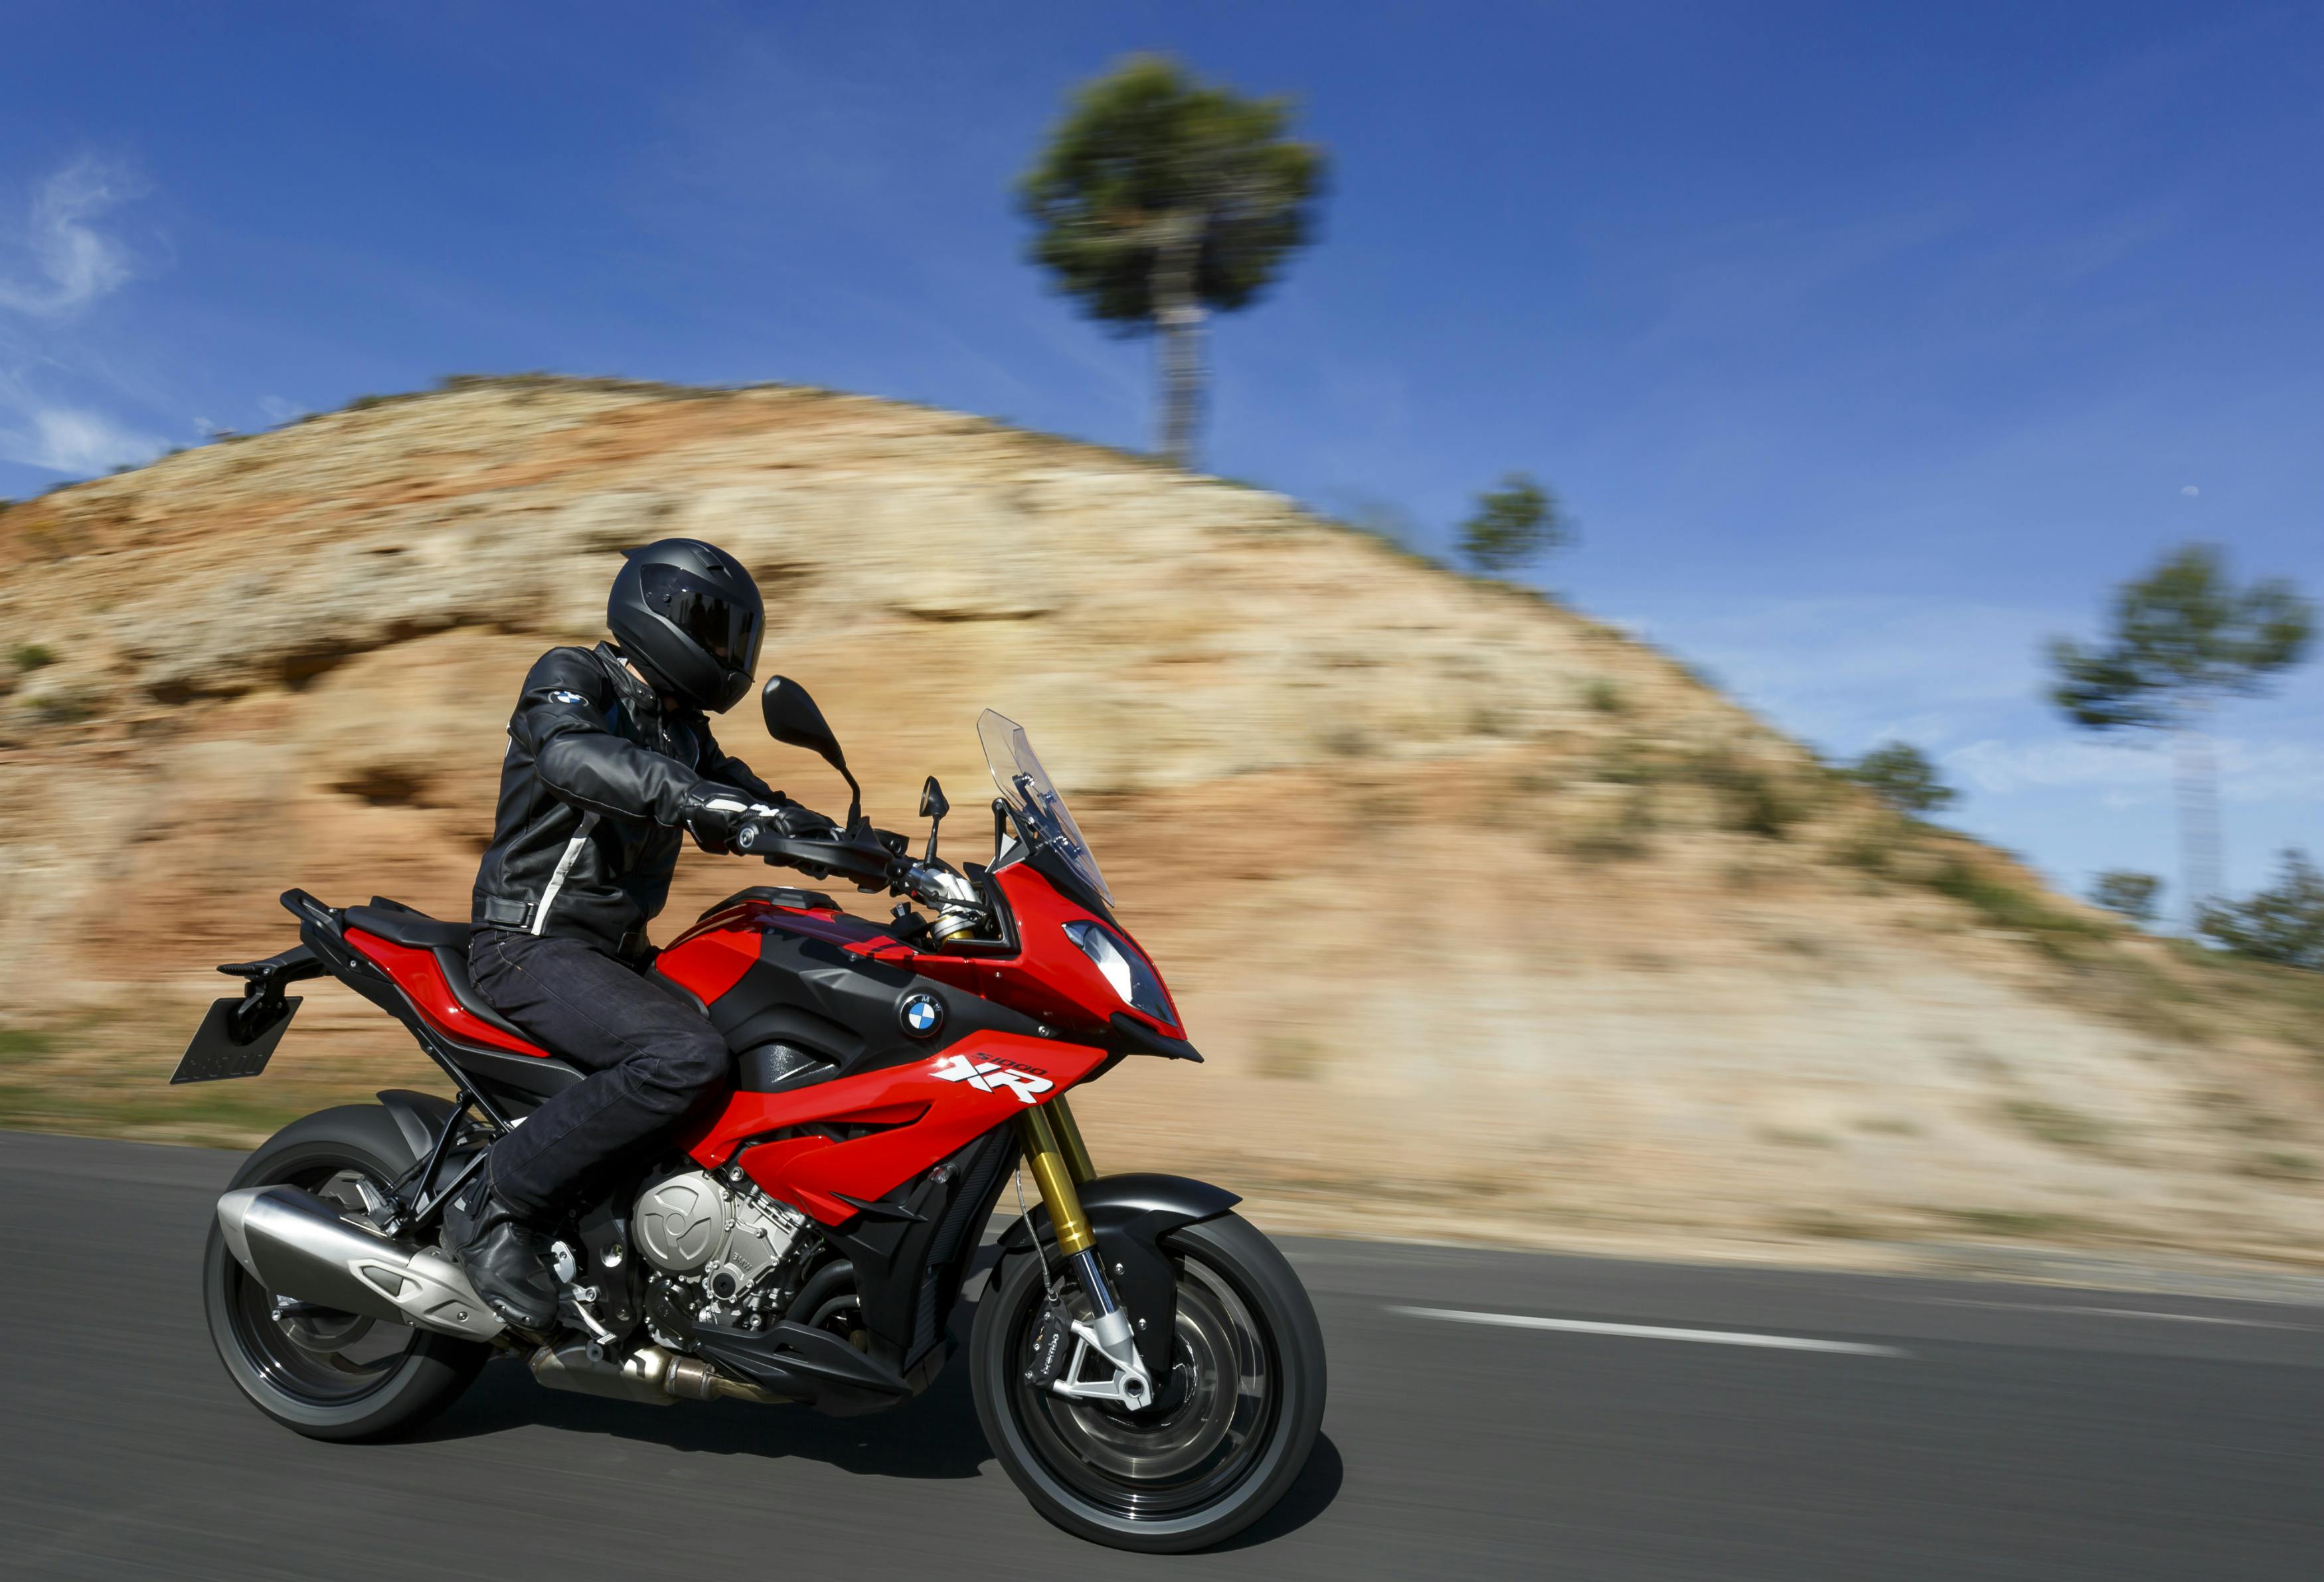 BMW S 1000 XR being ridden on the hill road